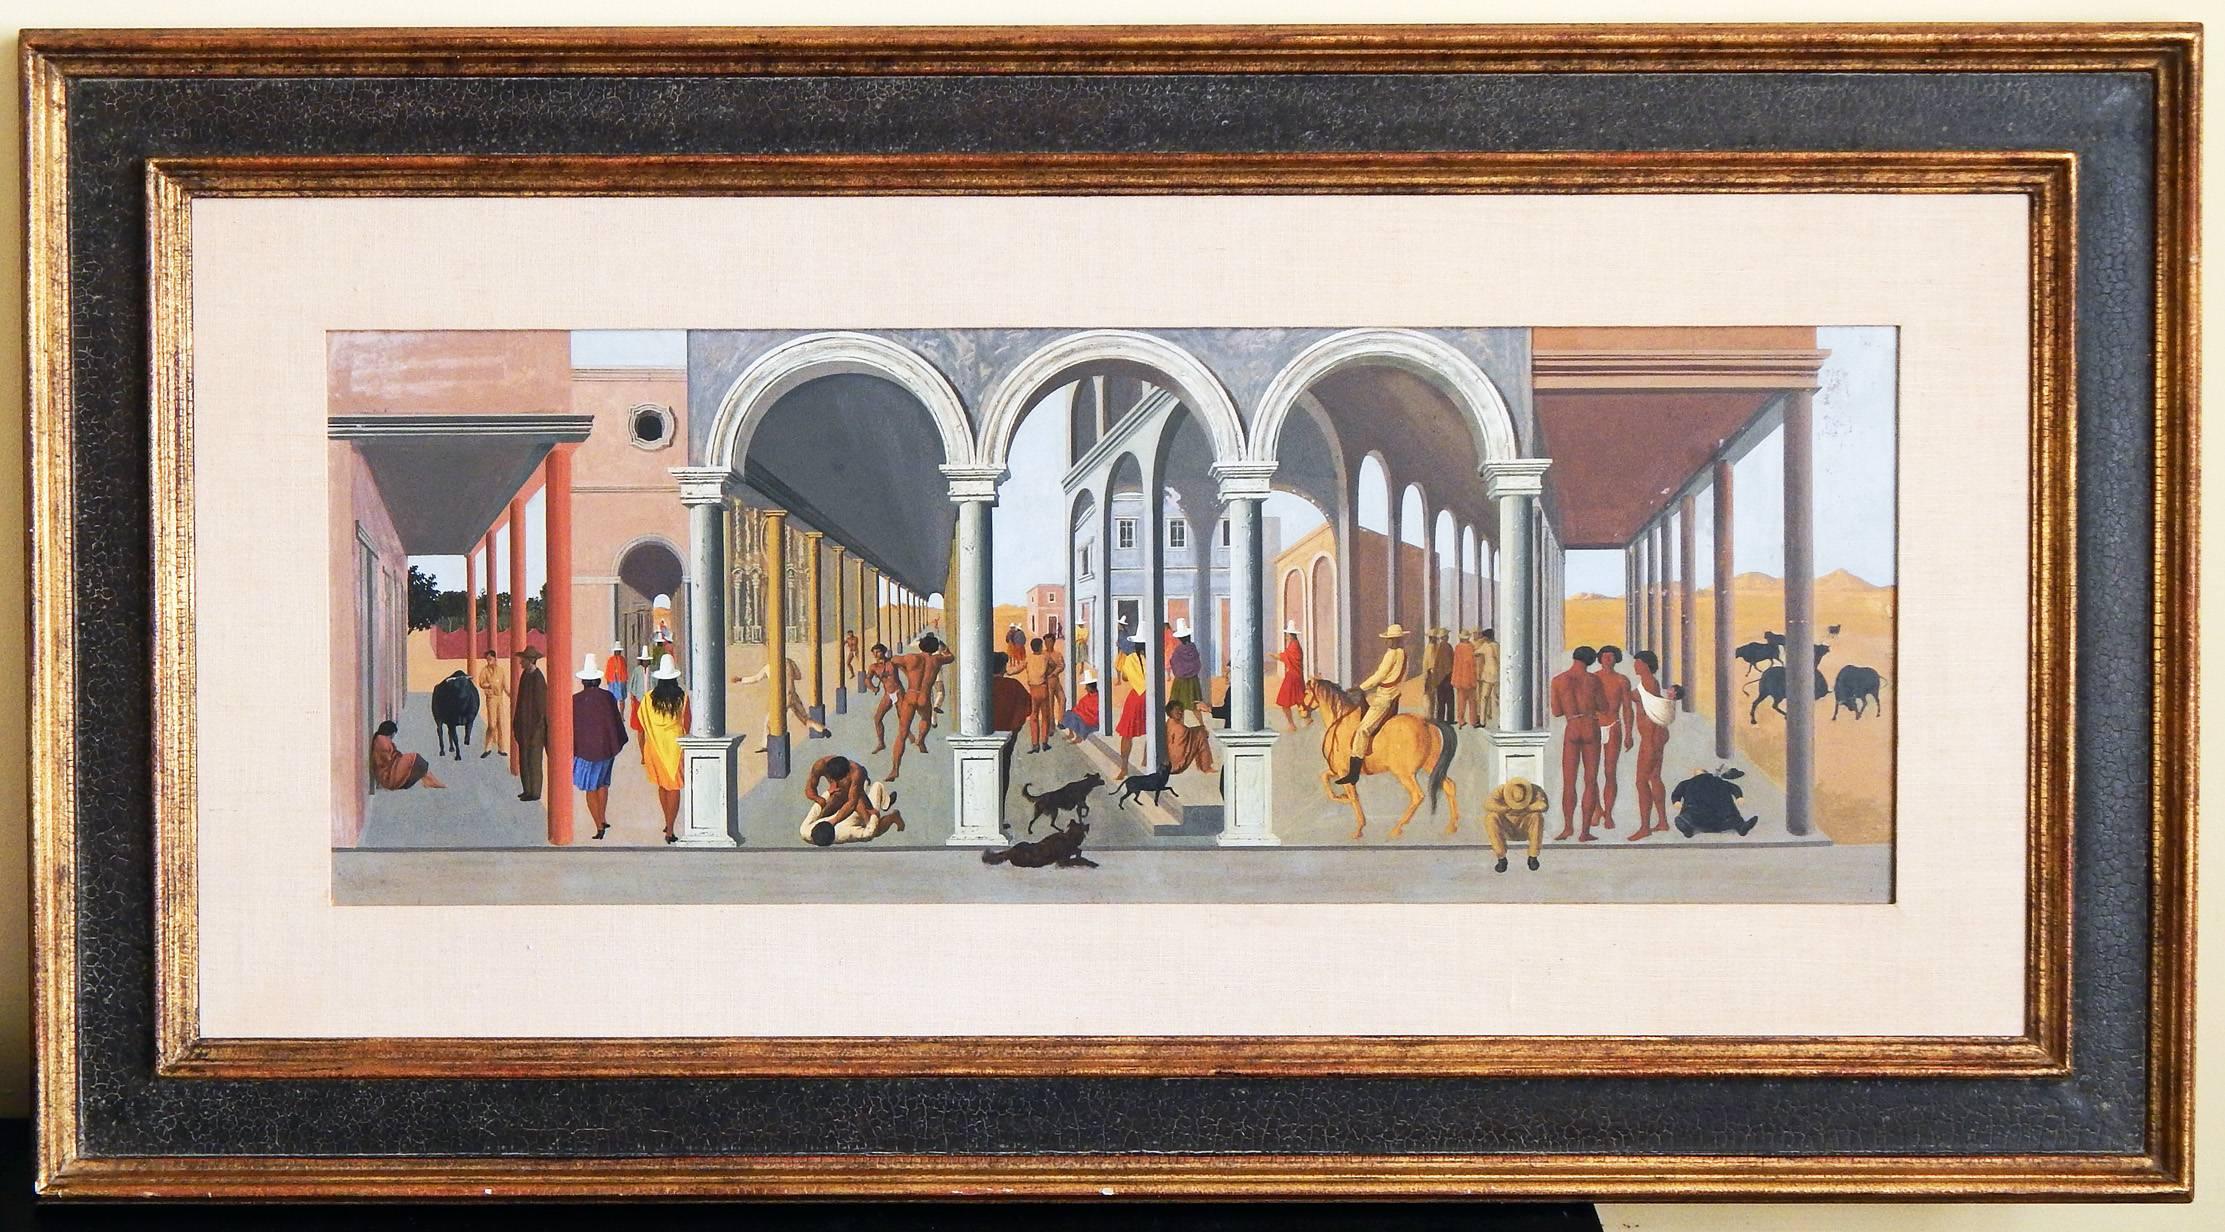 Perhaps the greatest masterpiece painted by Aldo Pagliacci, best known for his surrealist scenes of male youths in his native Italy, this large and ambitious triptych presents over 40 figures in a series of arched passageways around a central plaza